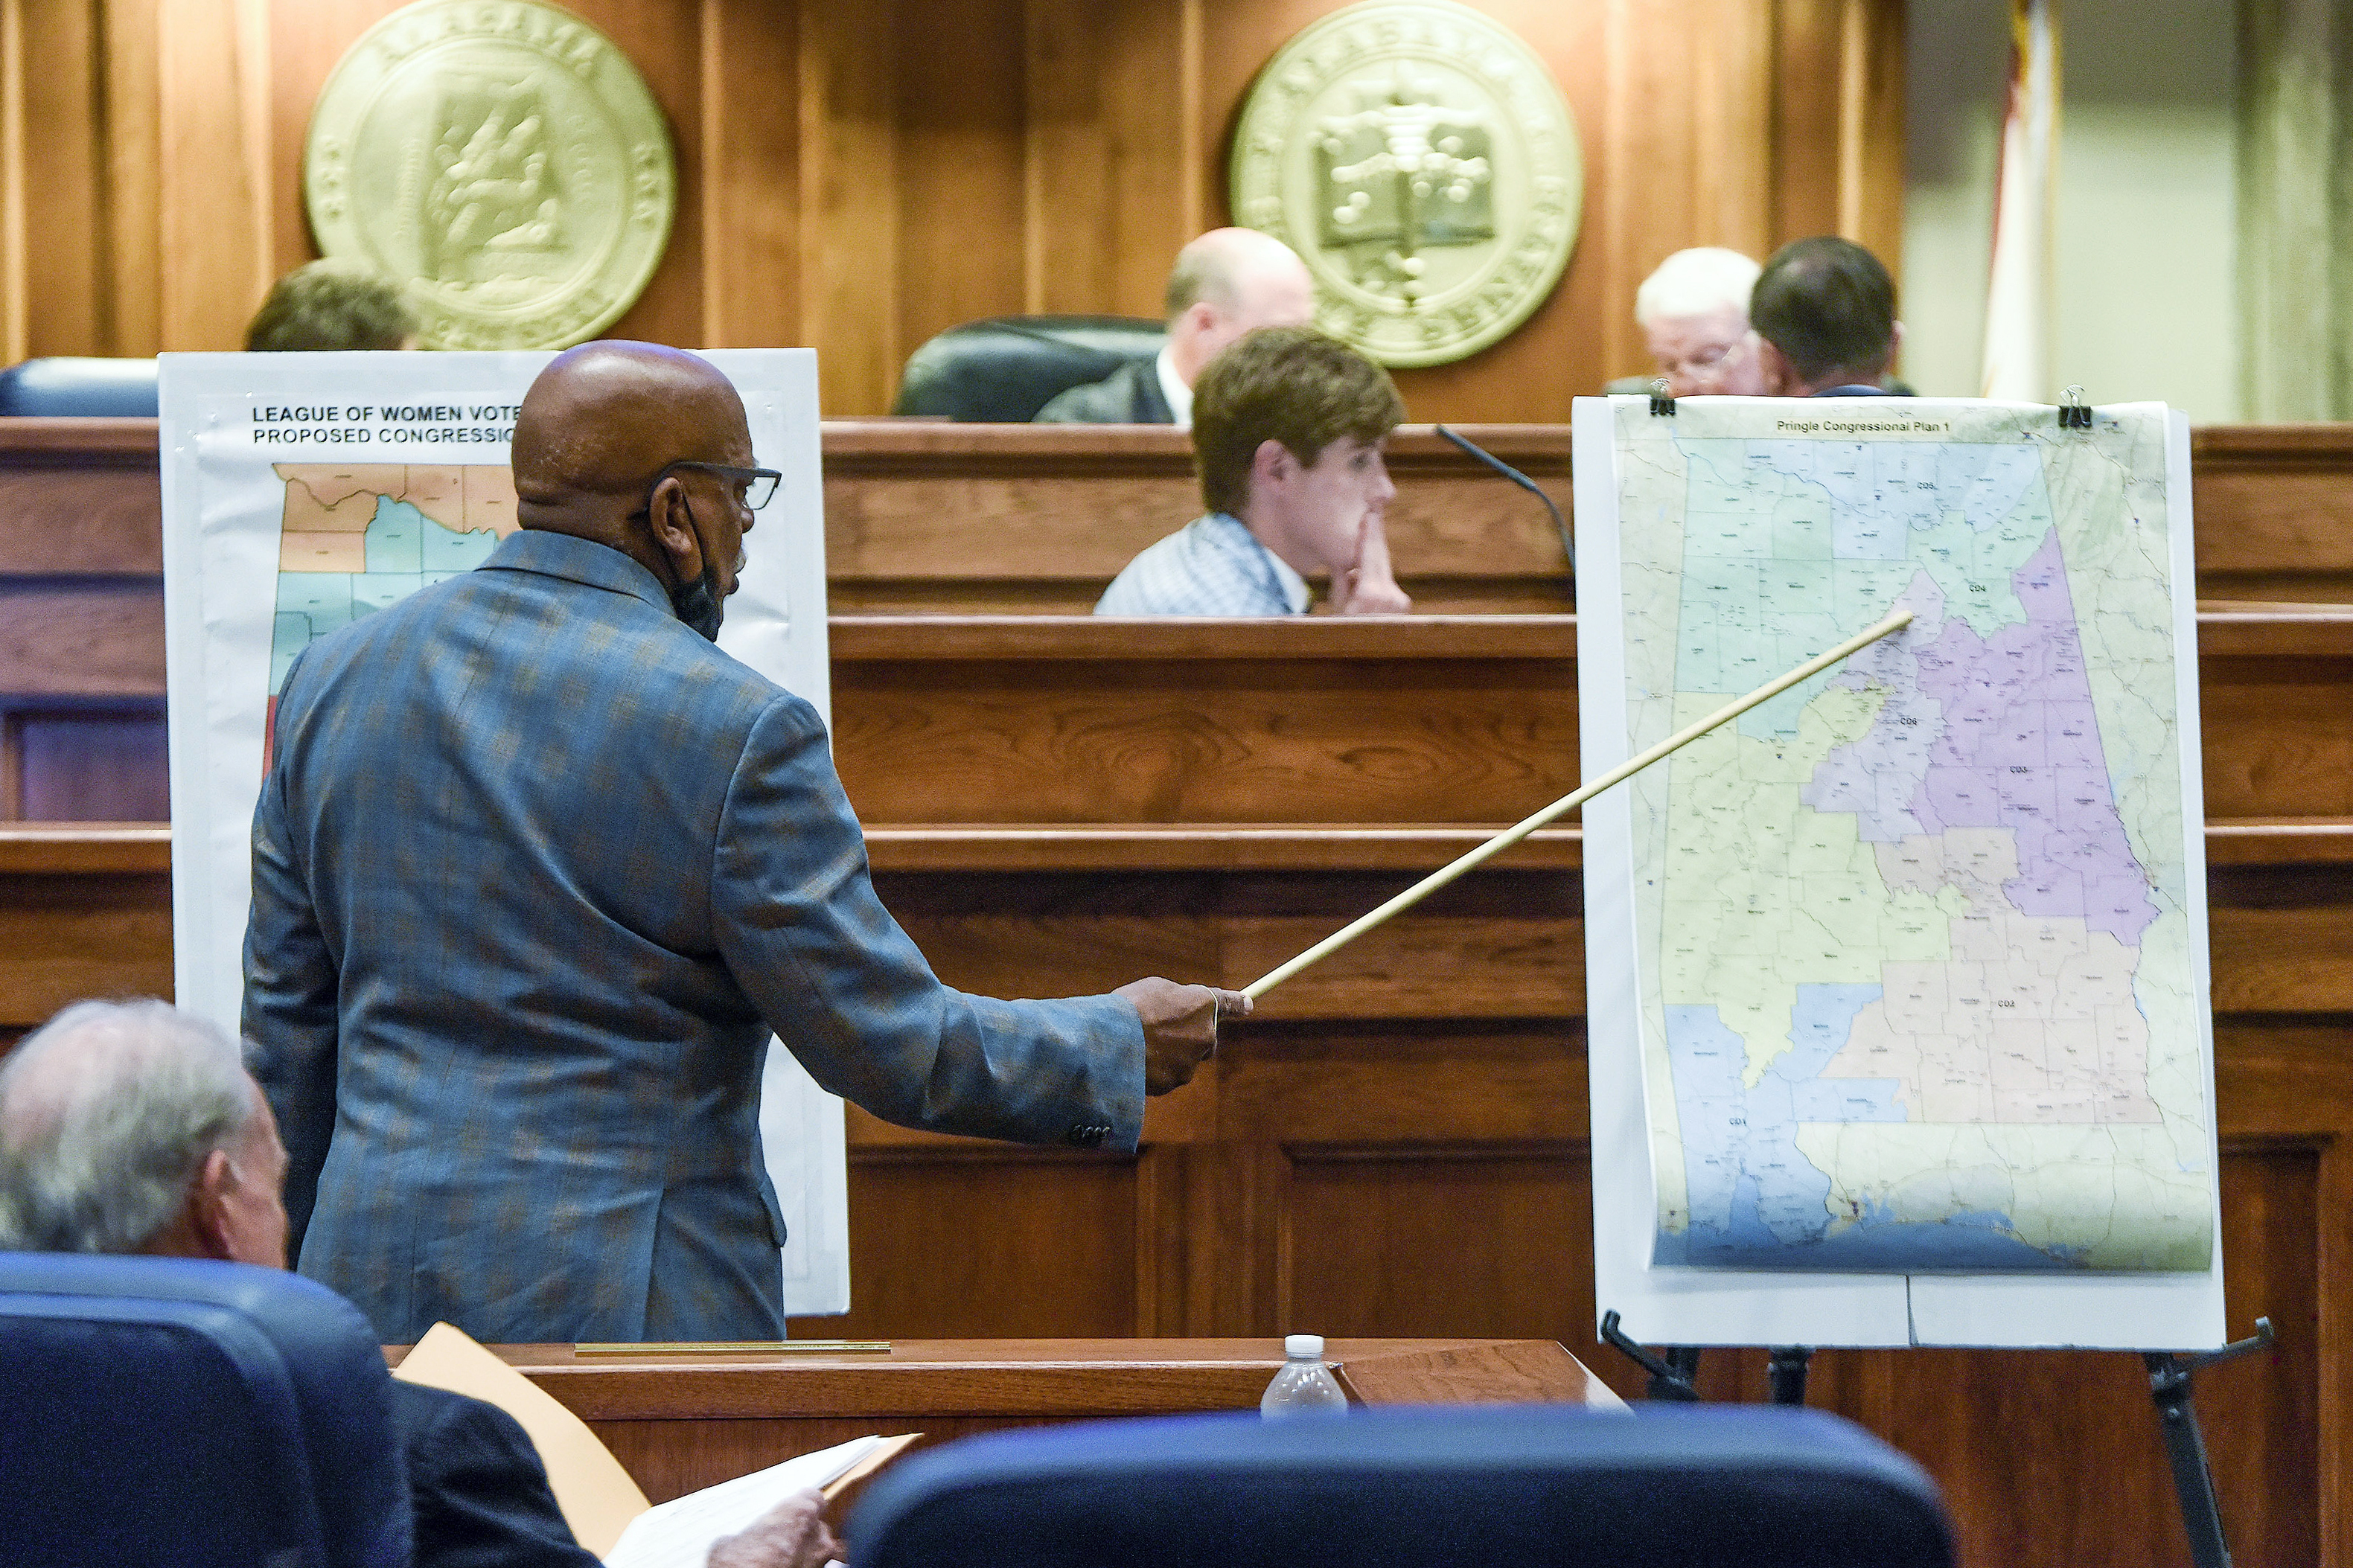 Sen. Rodger Smitherman compares U.S. Representative district maps during the special session on redistricting at the Alabama Statehouse in Montgomery, Ala., Nov. 3, 2021.